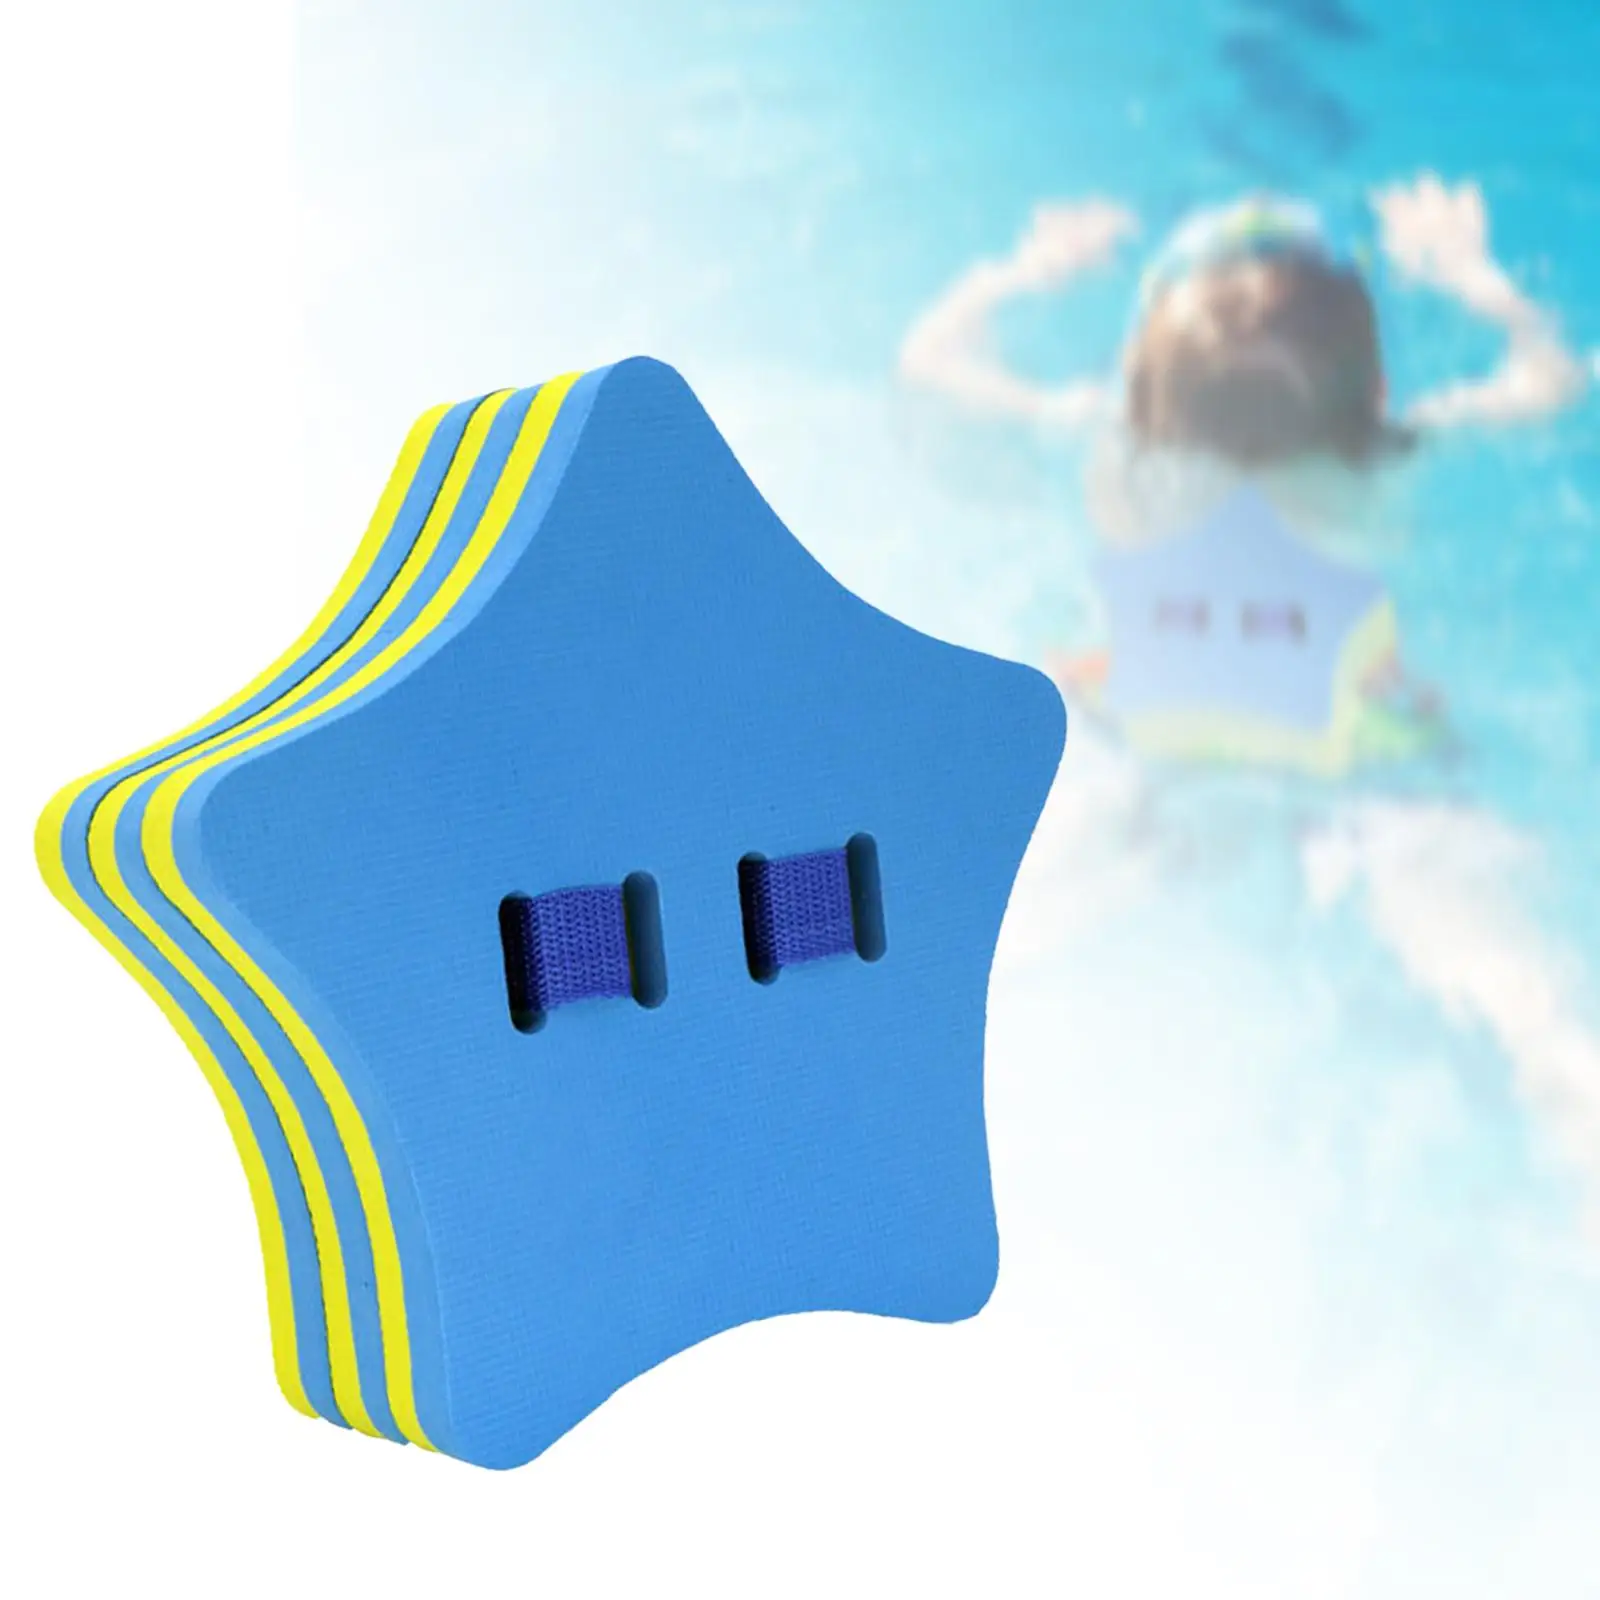 Adjustable Back foam floating Belt Waist Beach Surfboard Buoyancy for Children and Adults Beginners Water Sports Party Supplies